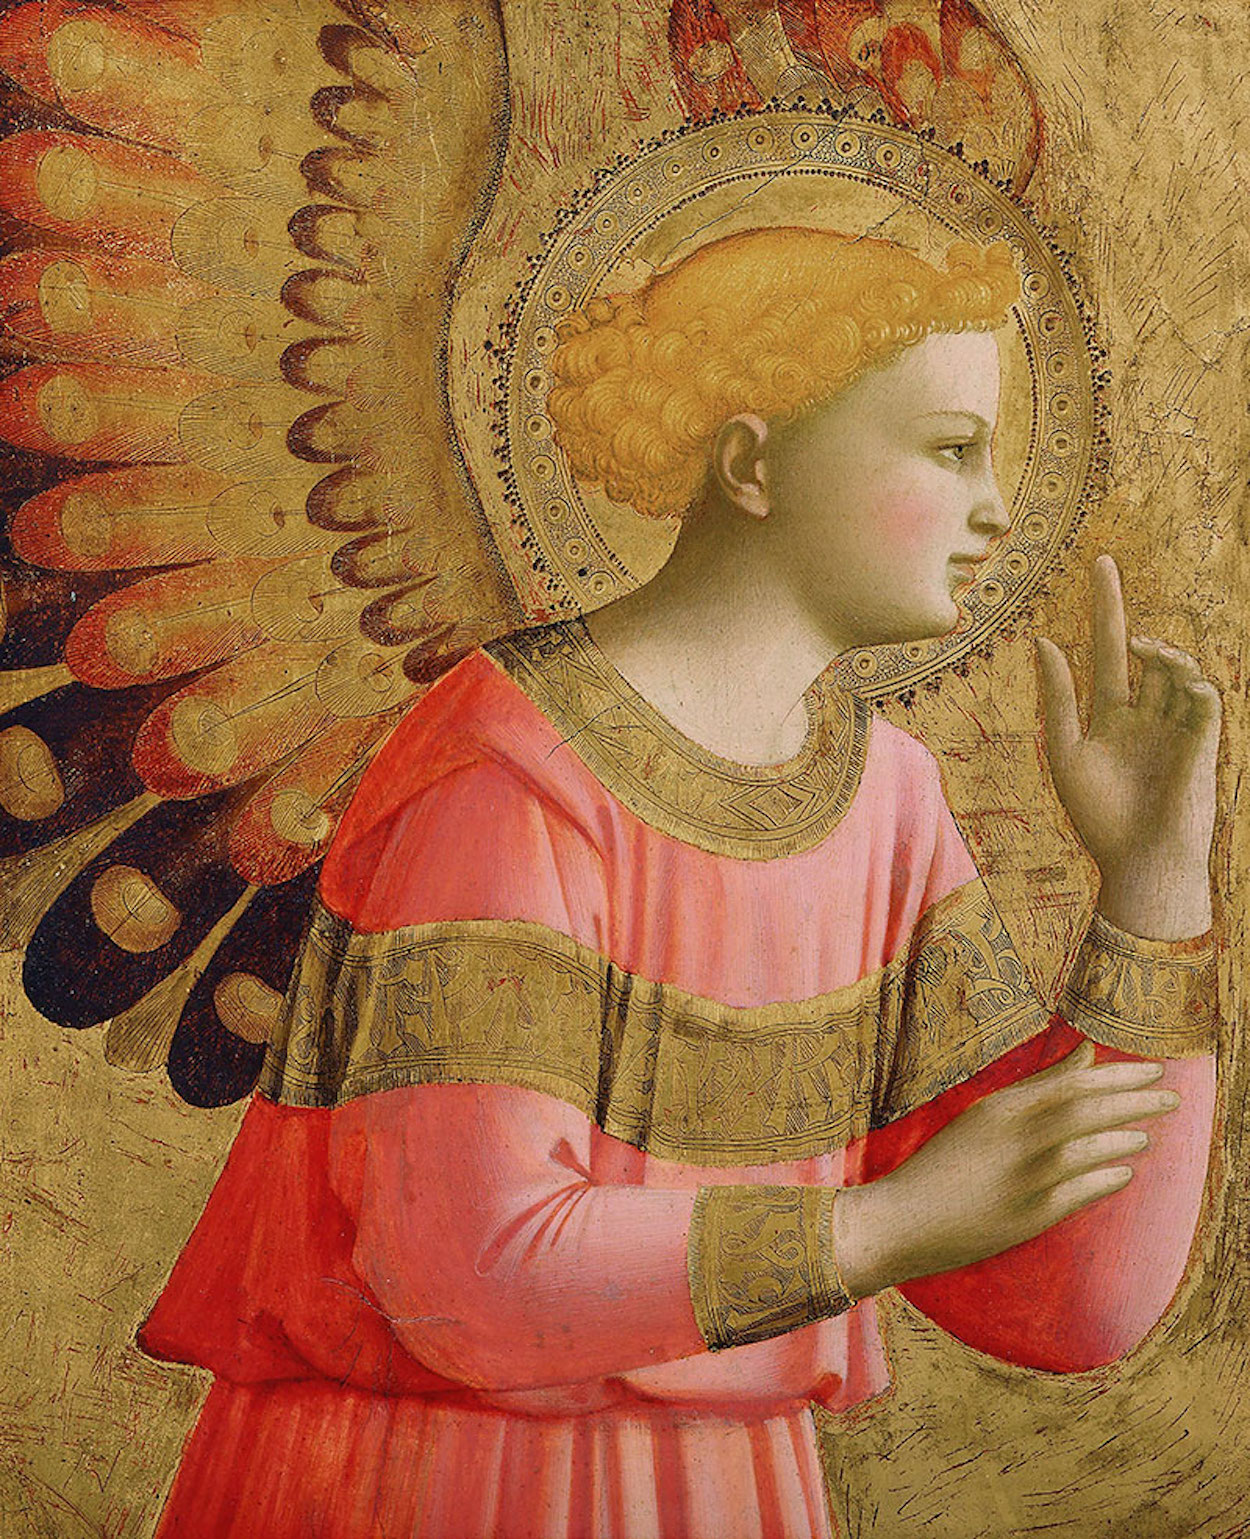 Ángel Anunciador by Fra Angelico  - 1450-1455 Detroit Institute of Arts